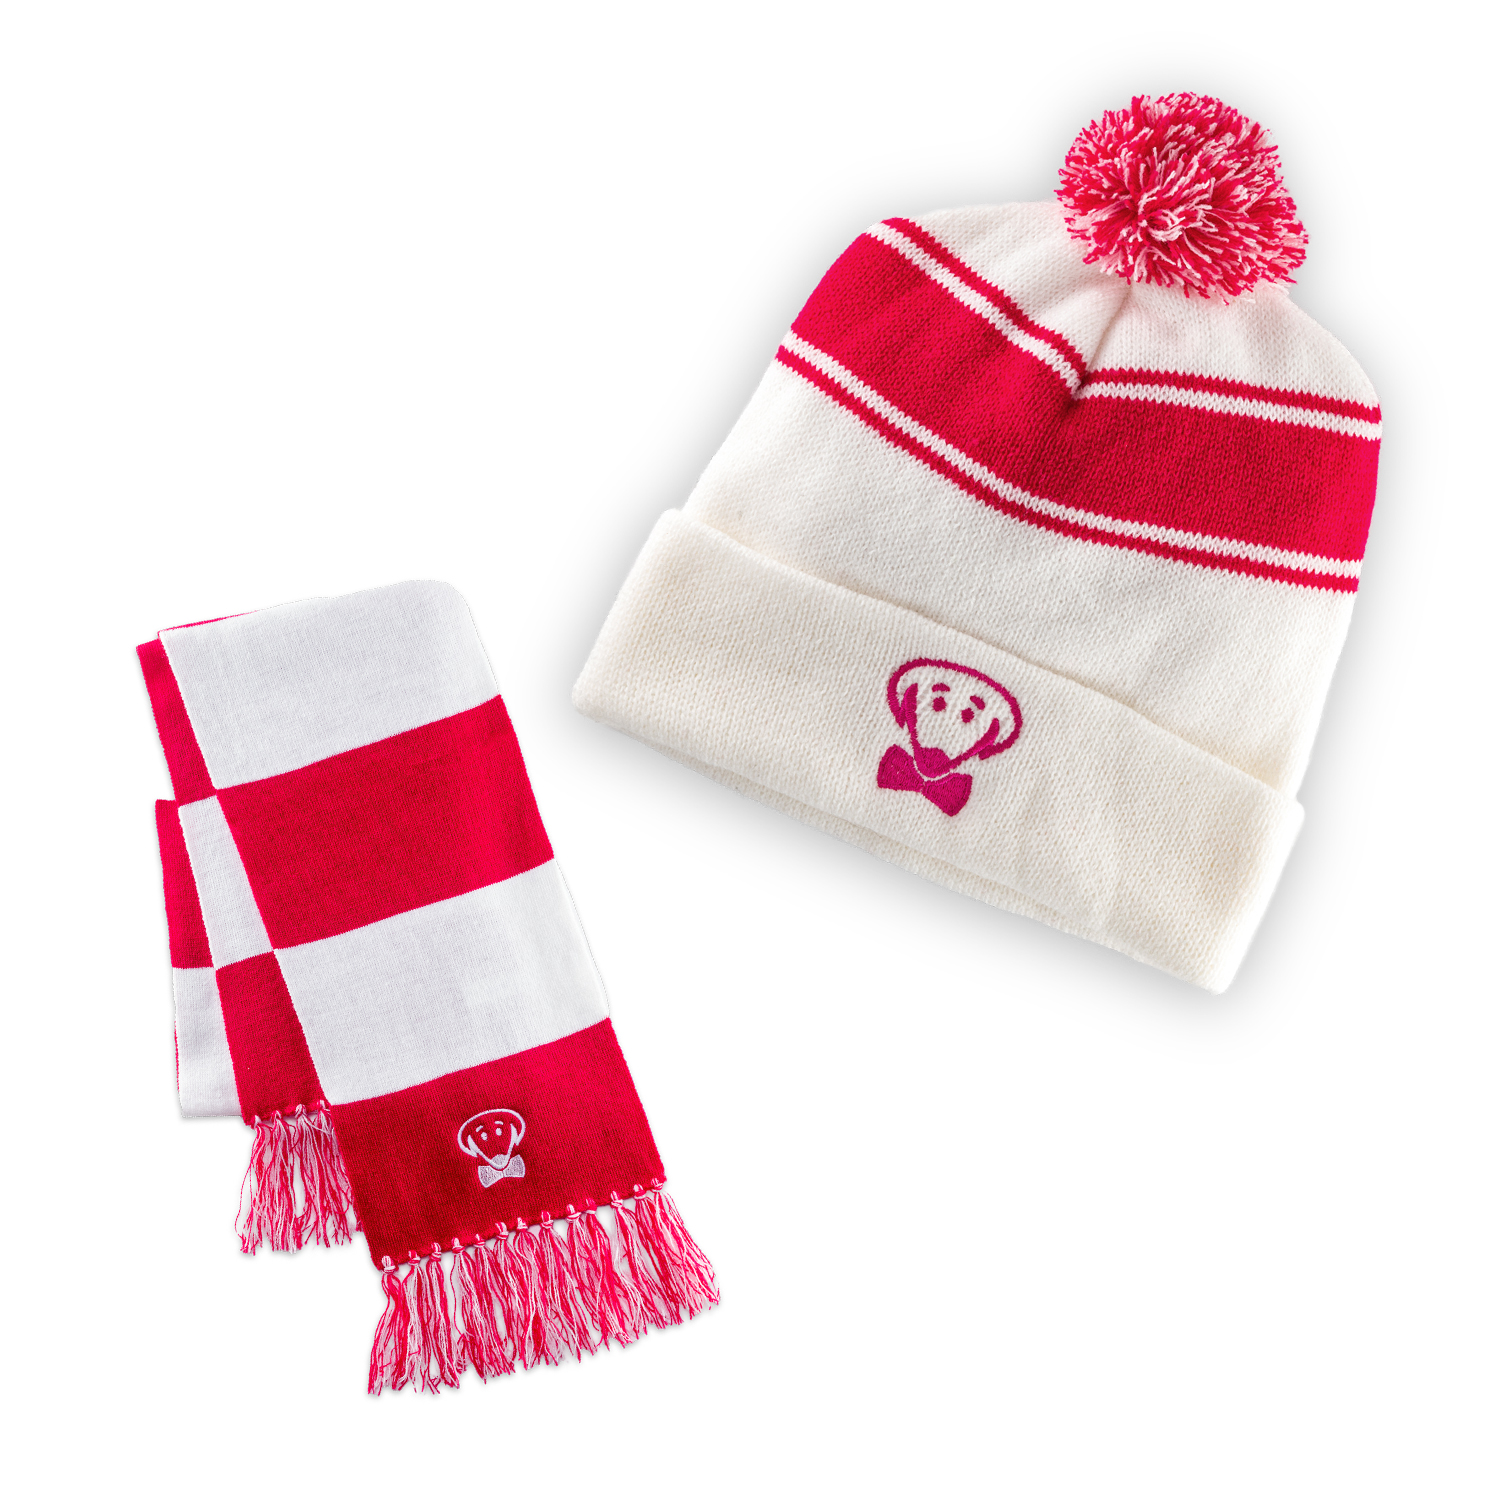 Beau Tyler - Olsen hat and scarf set white and pink raspberry